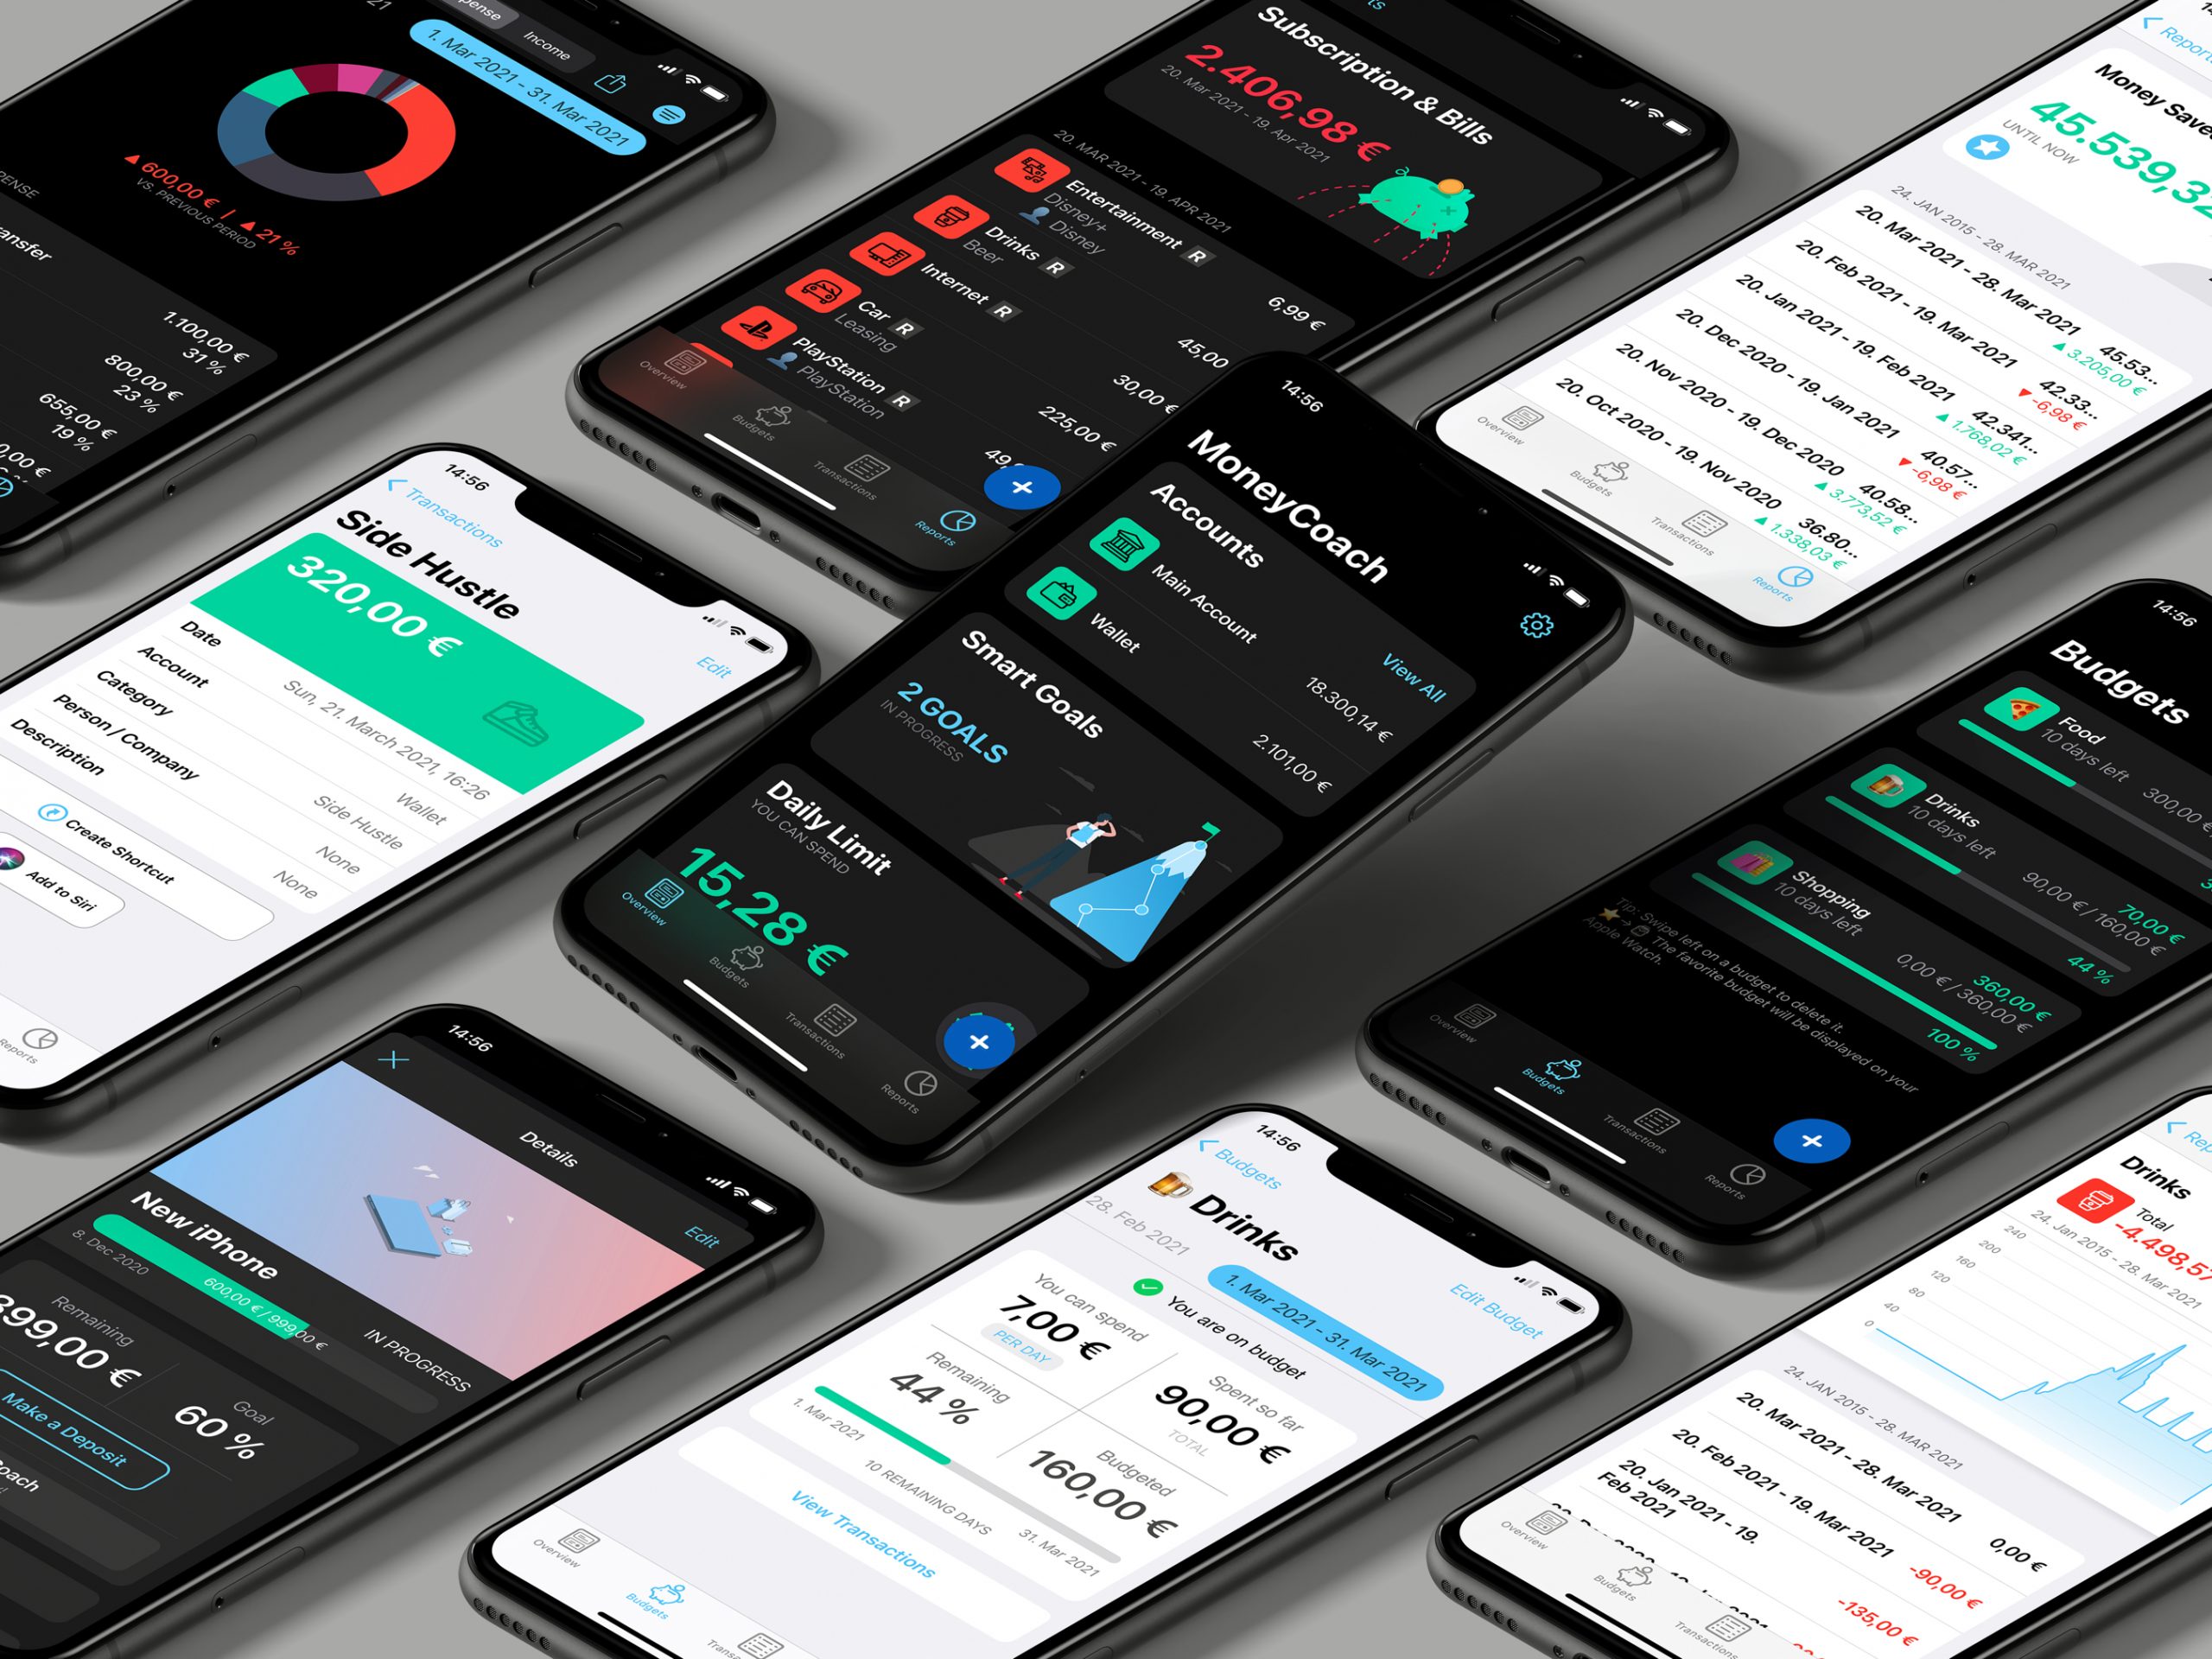 MoneyCoach 7 Releases Today Along iOS 15 And Promises Big New Features